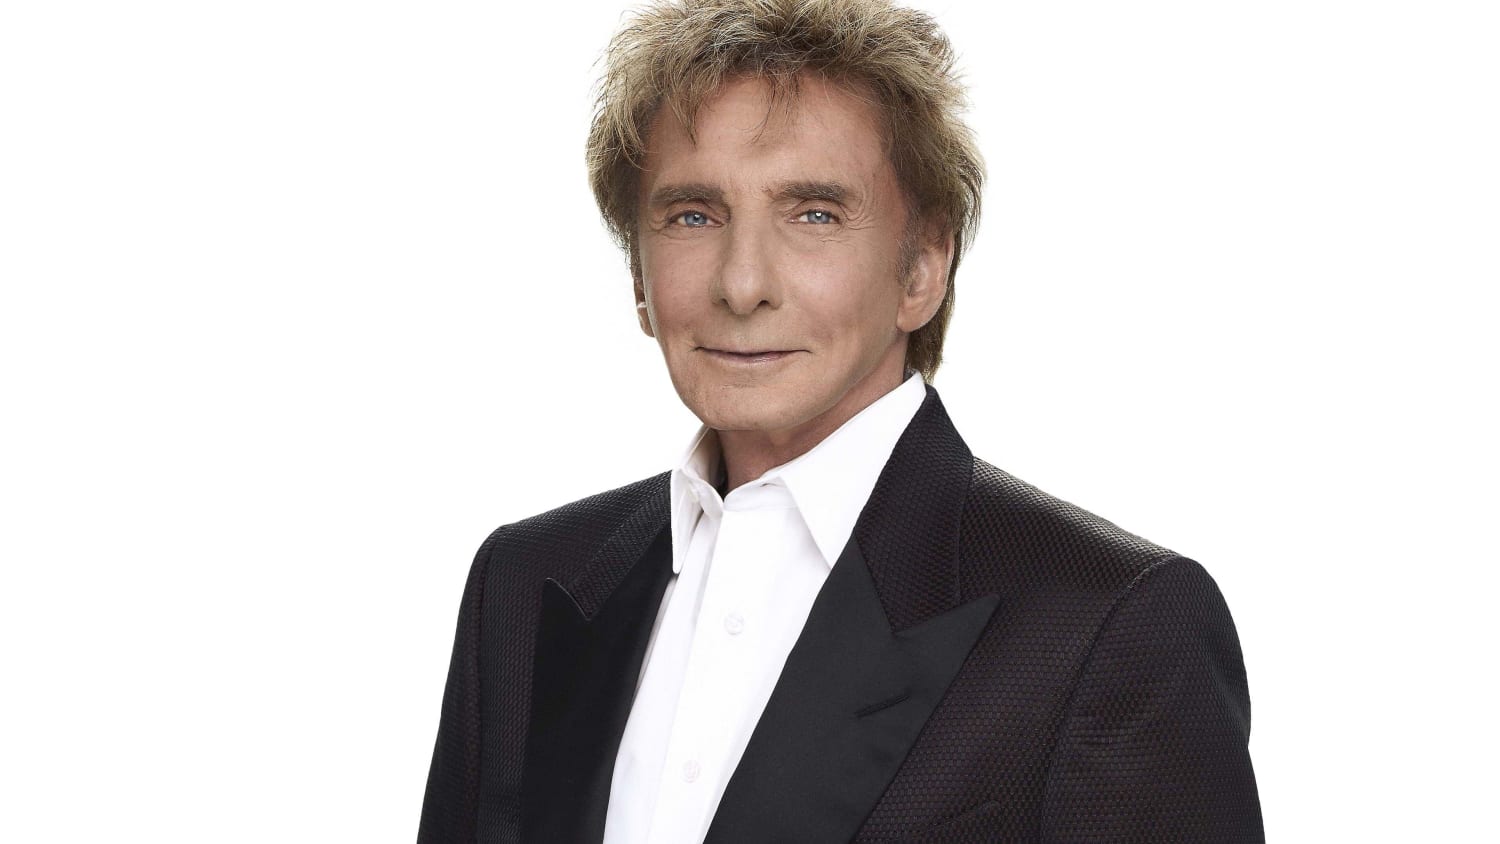 barry manilow - photo #8